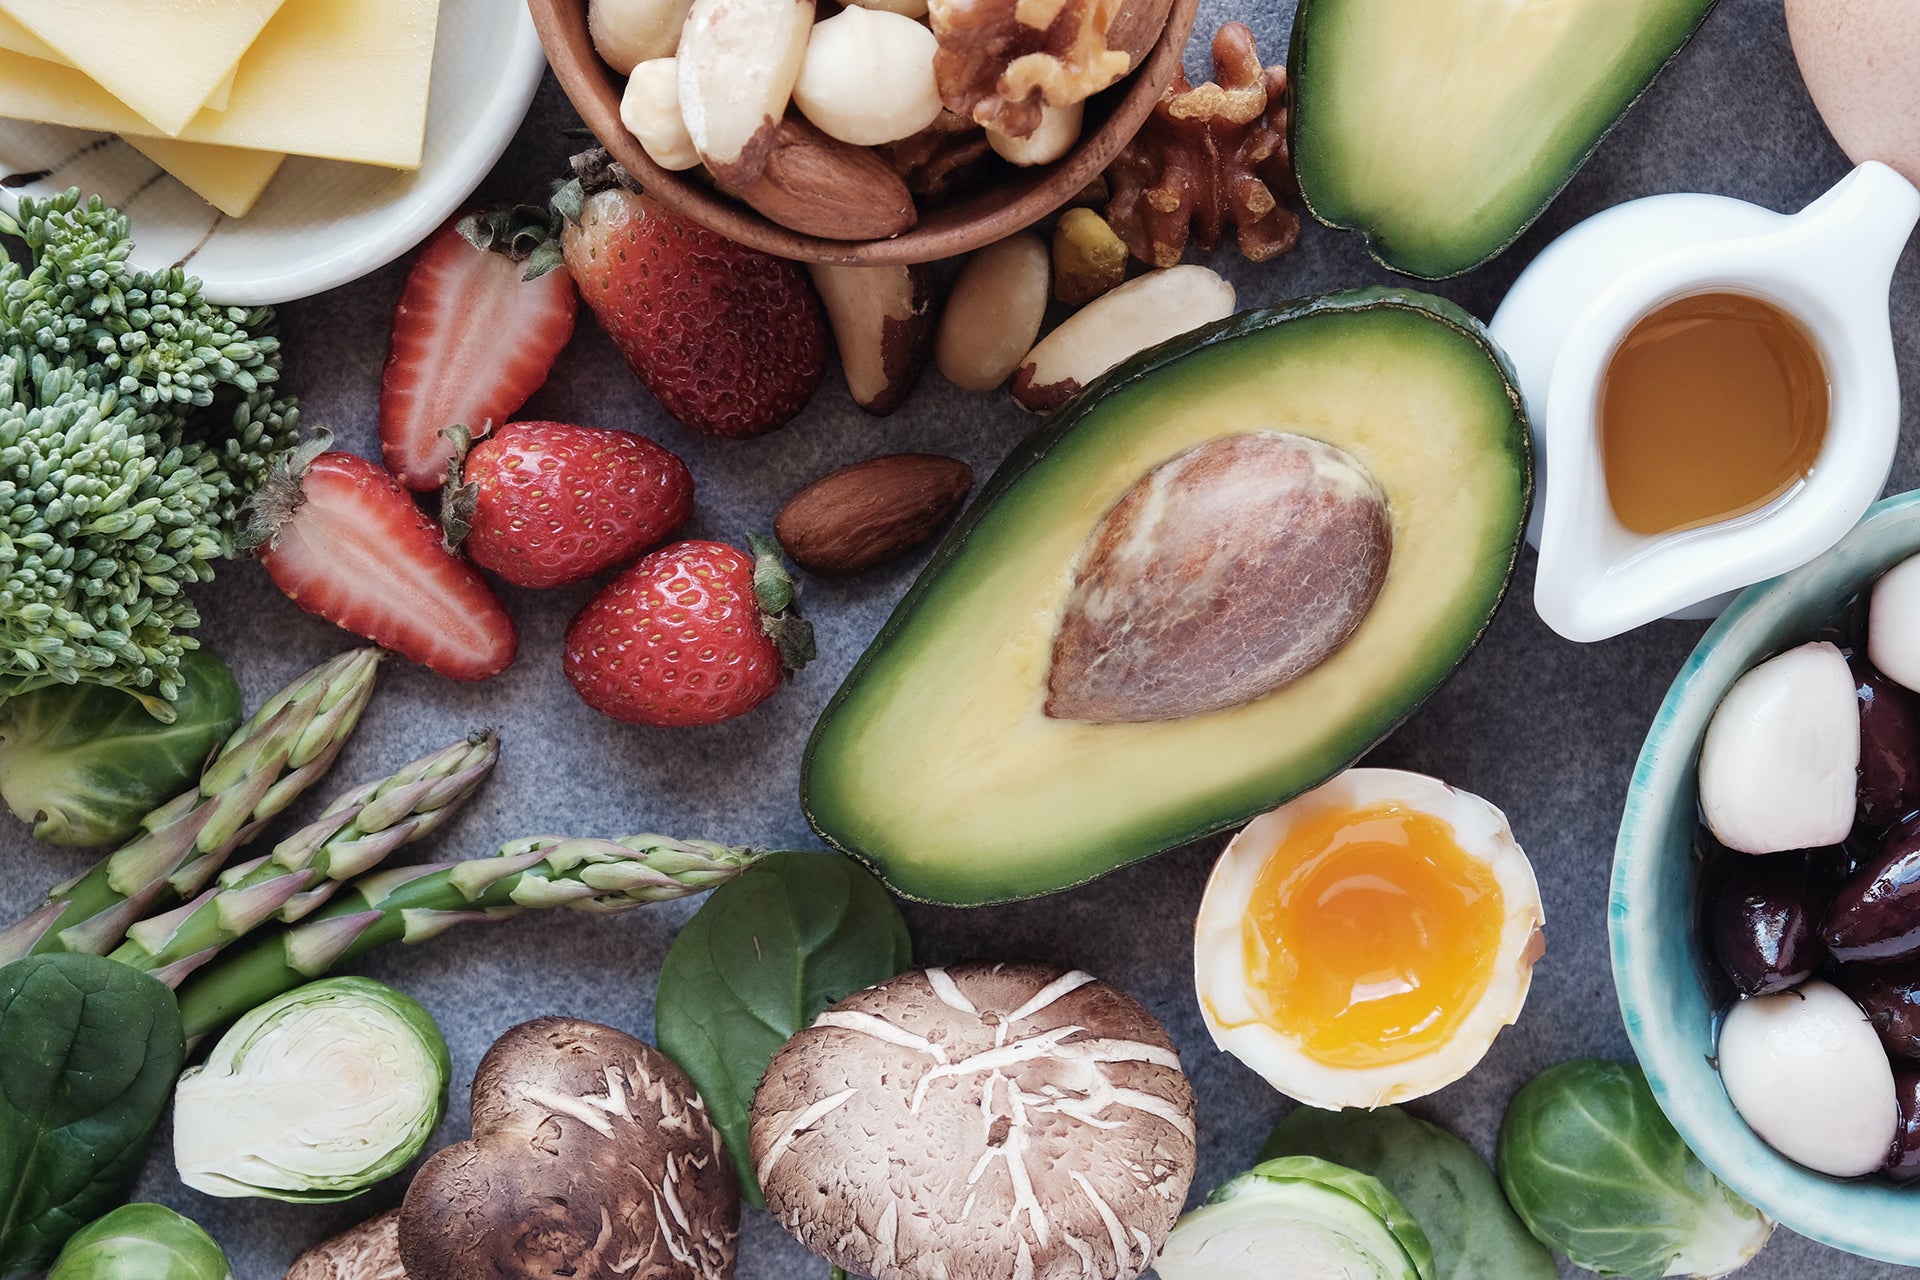 A healthy spread of fruits and vegetables including healthy fats such as avocados.